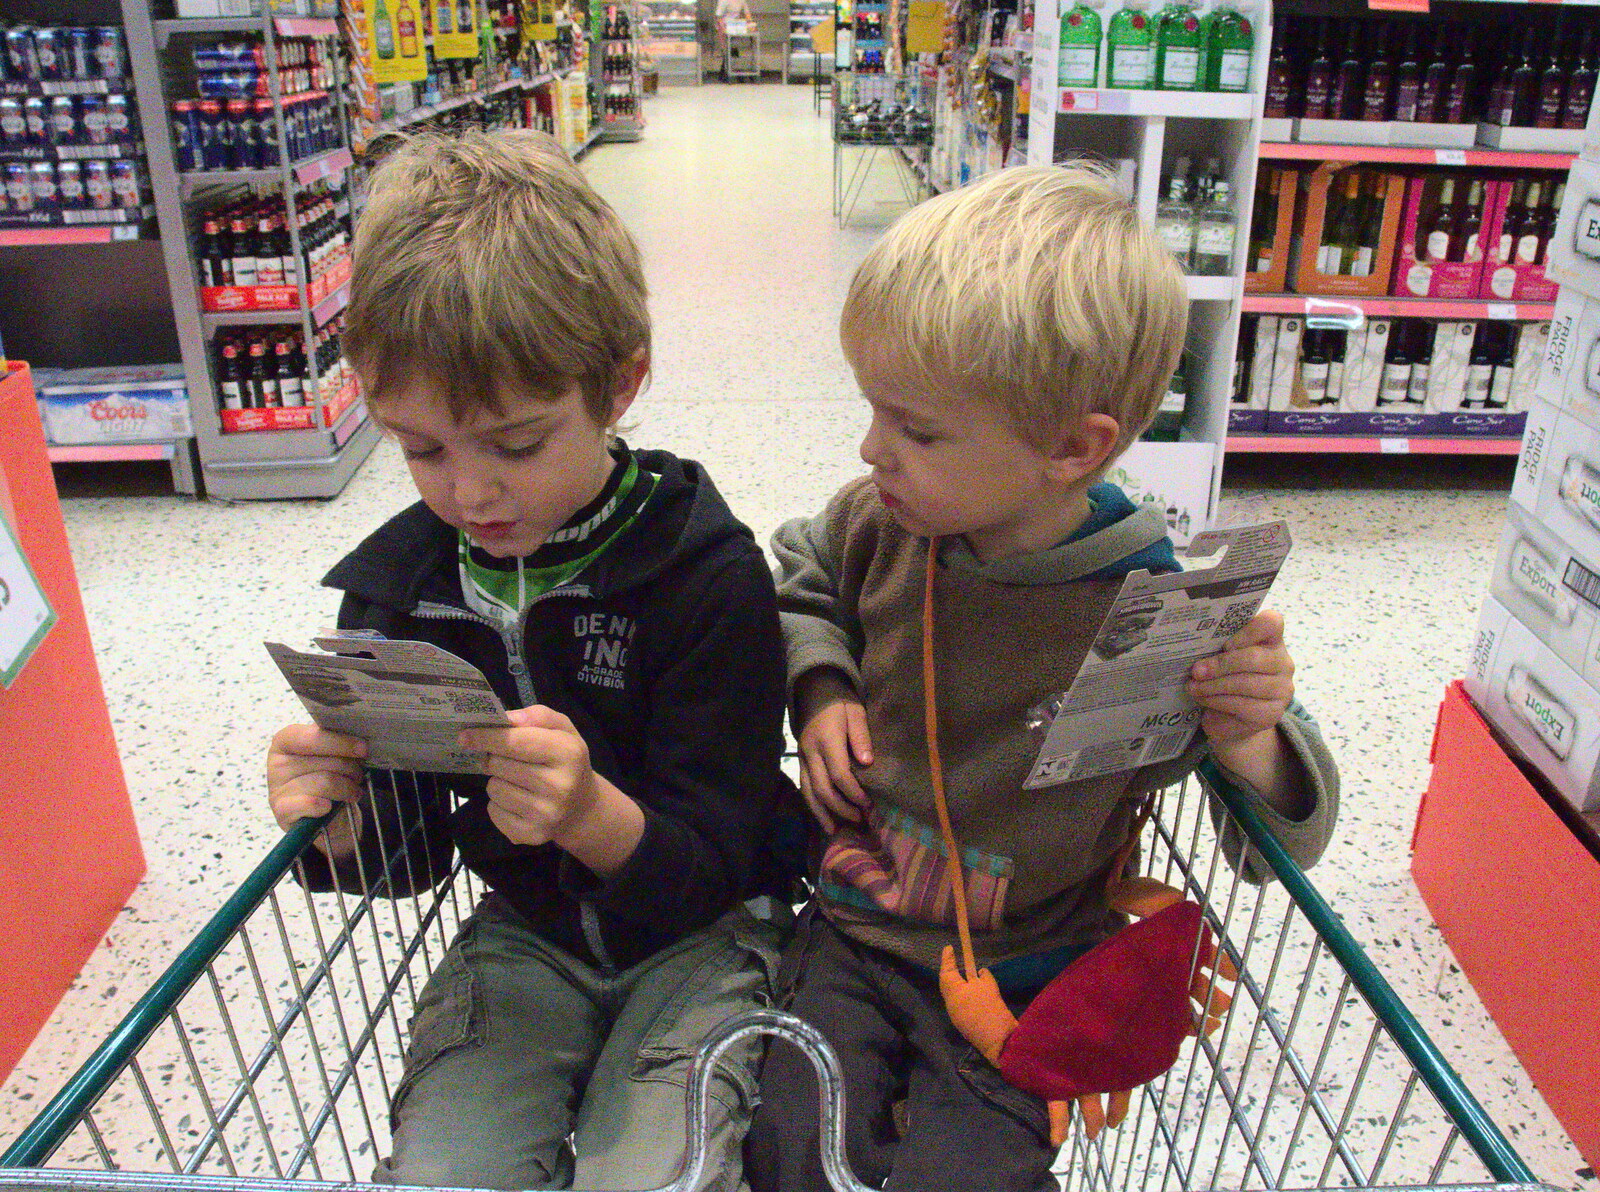 The boys in Morrisons from Apple Picking and The BBs at Framingham Earl, Norfolk - 25th October 2015